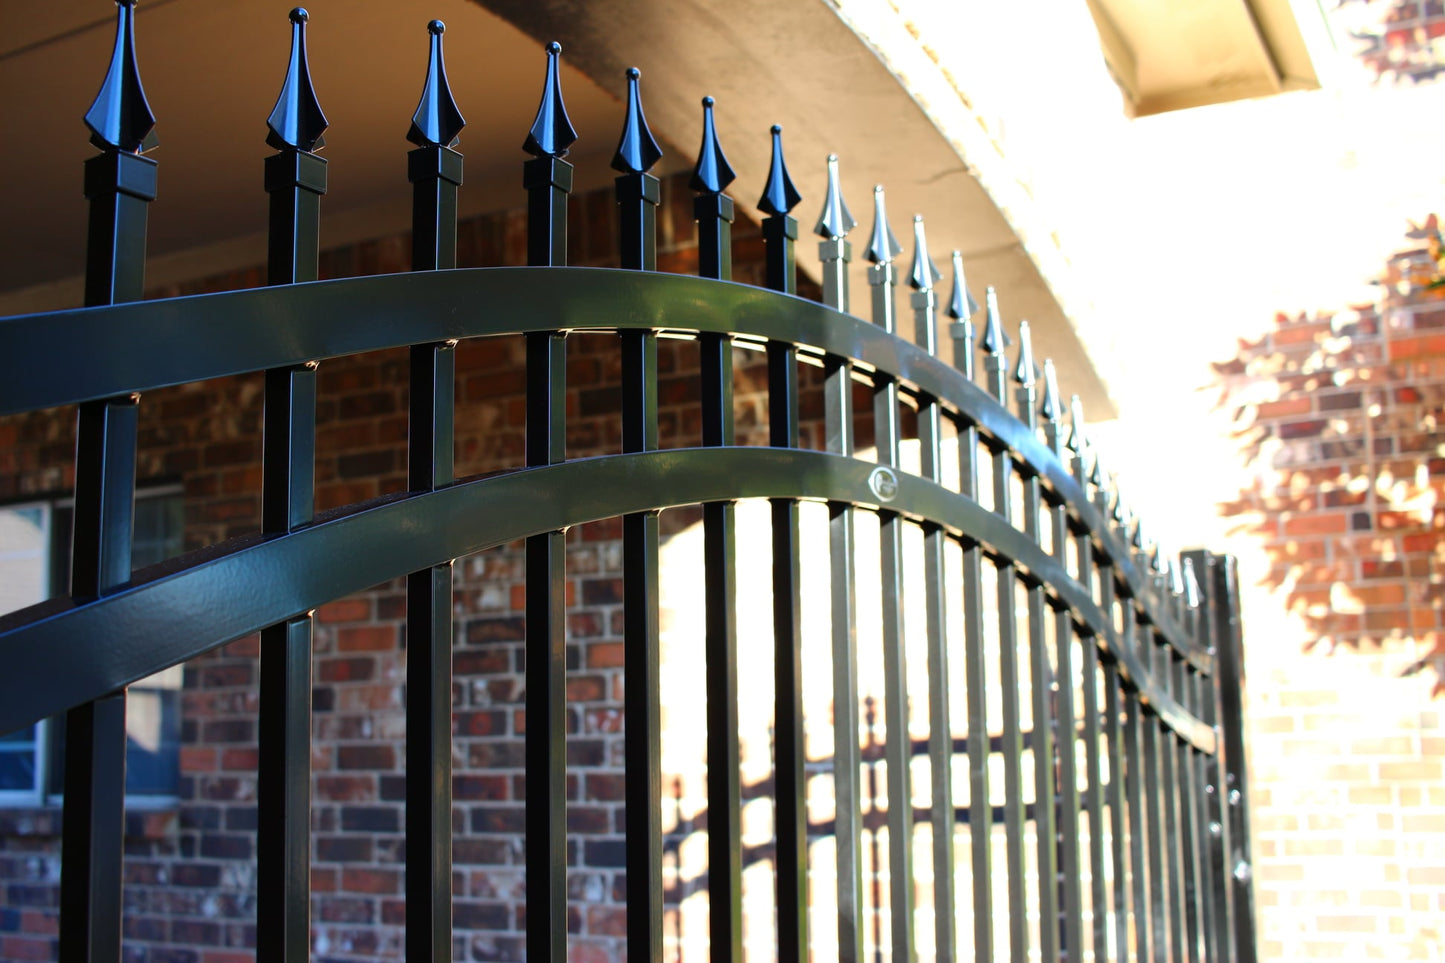 Aluminum Arched Extended Driveway Gate